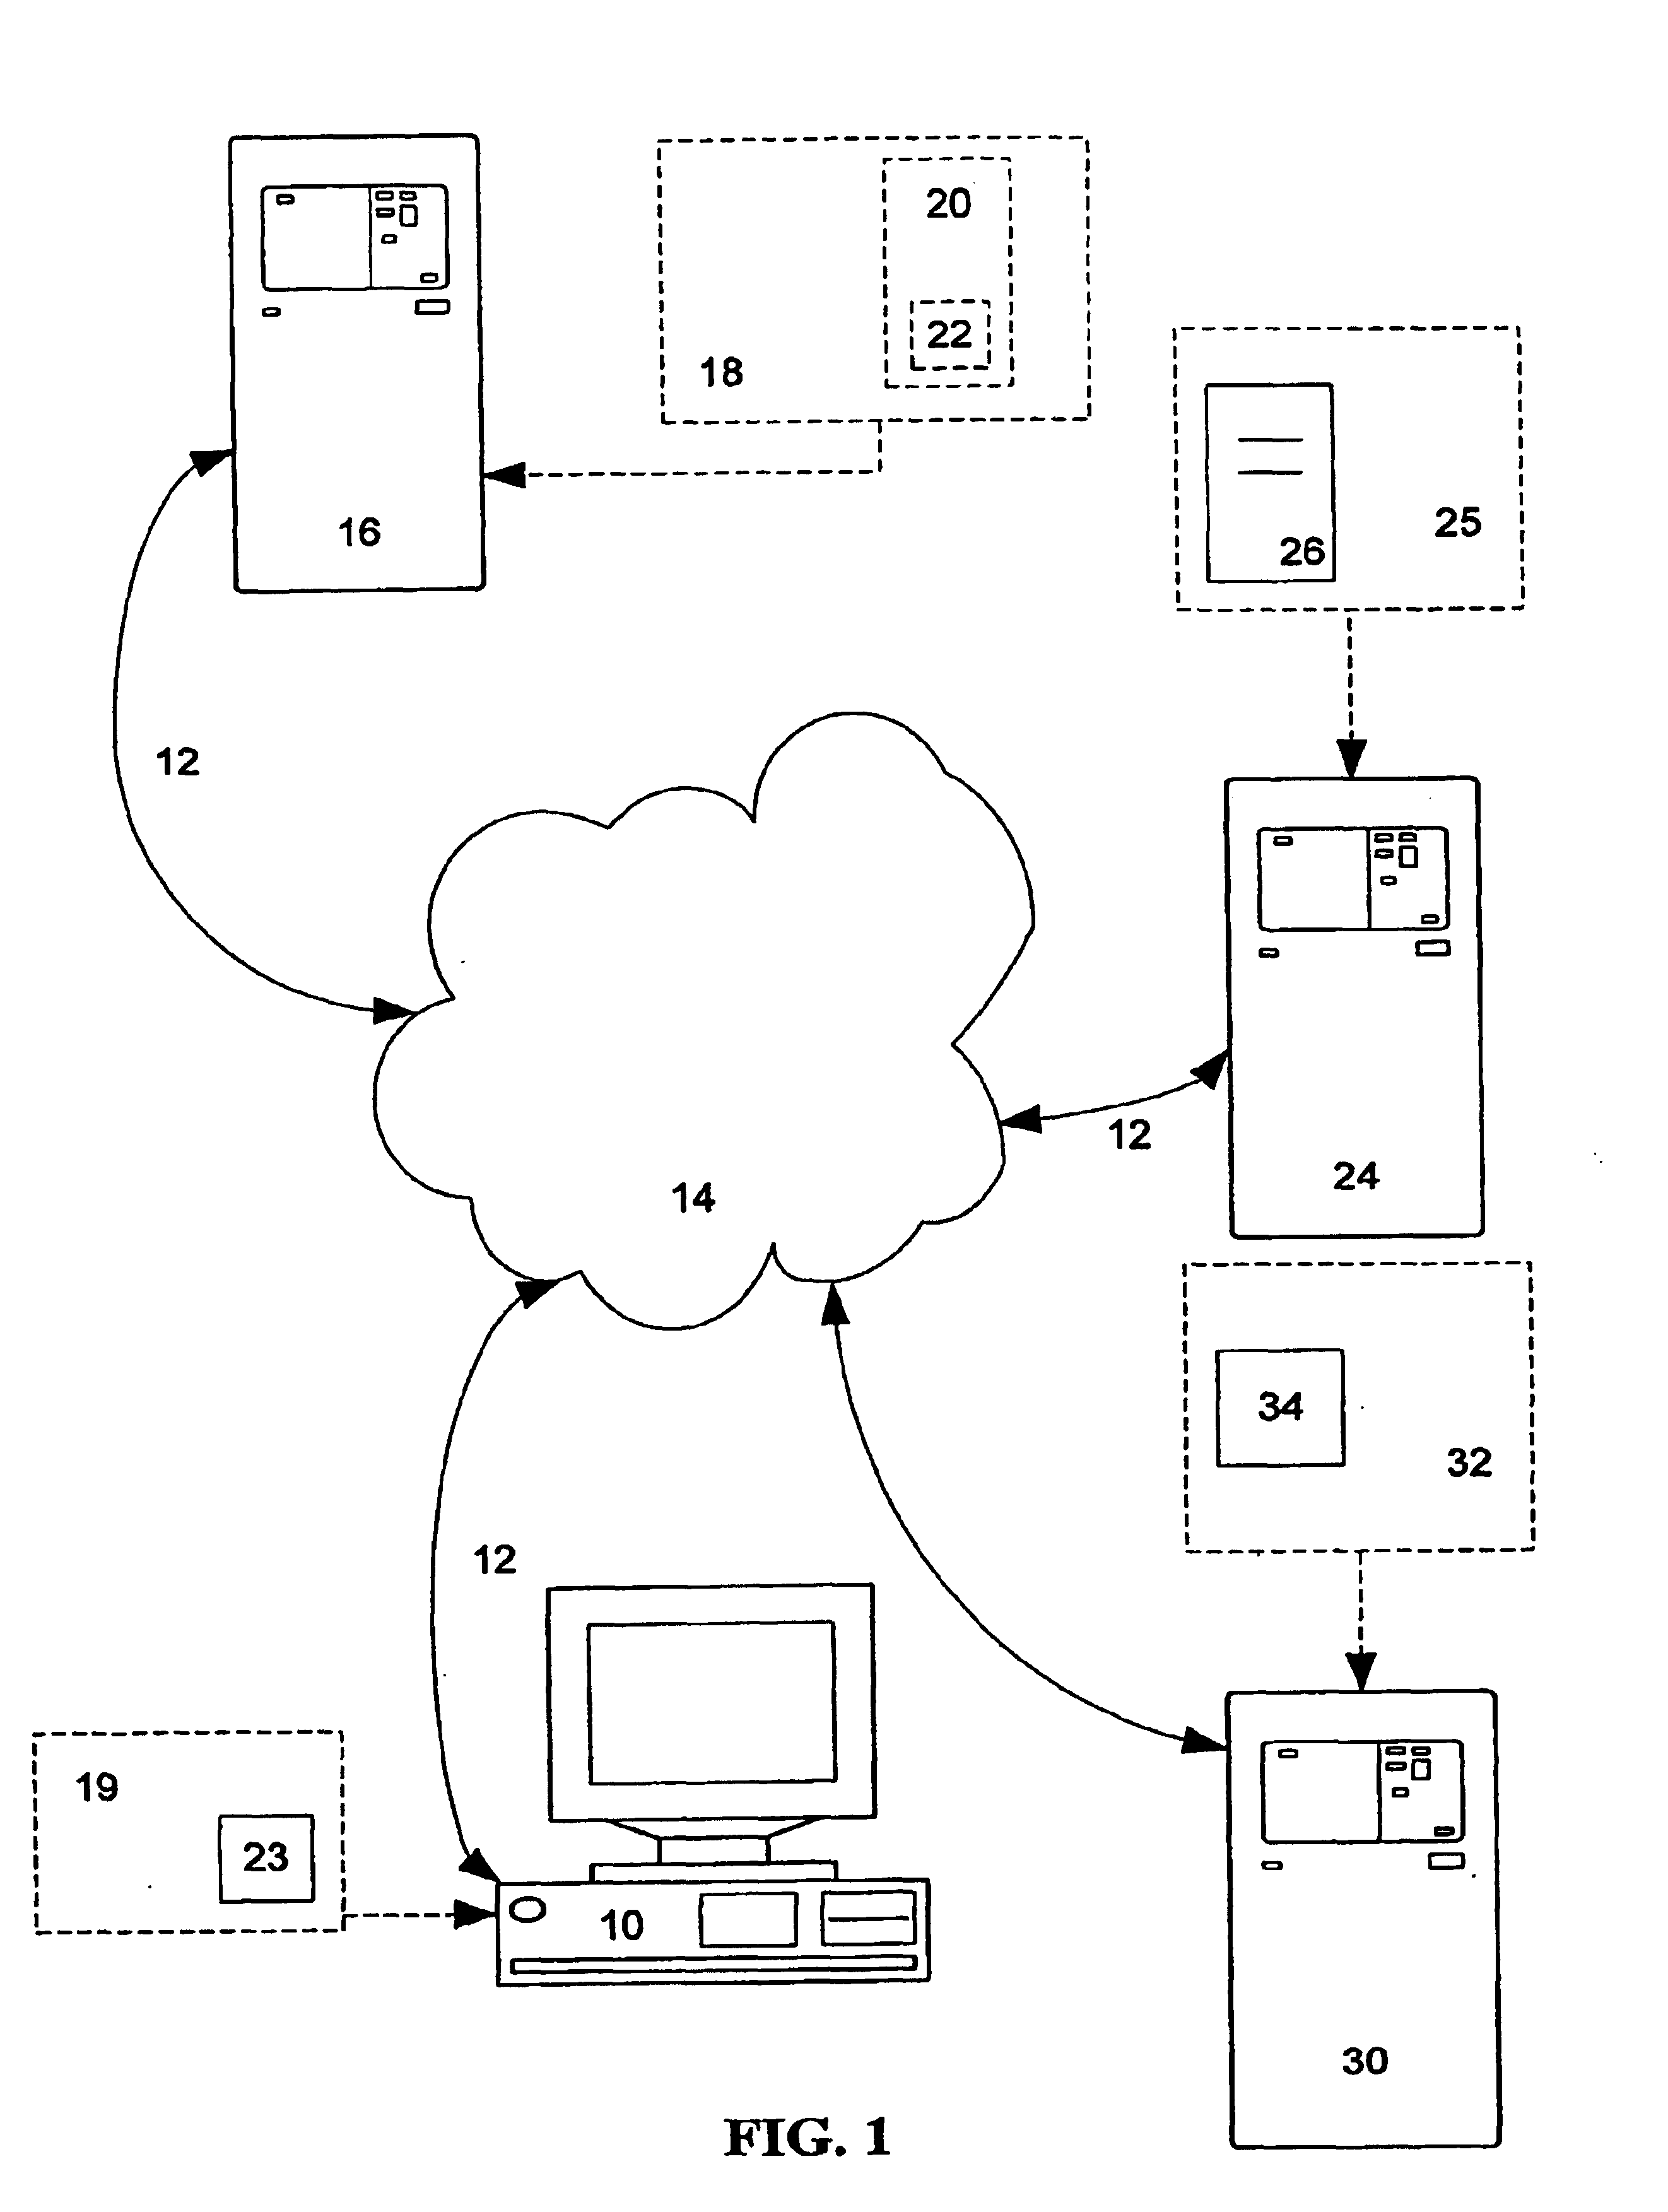 System and method for installing an auditable secure network